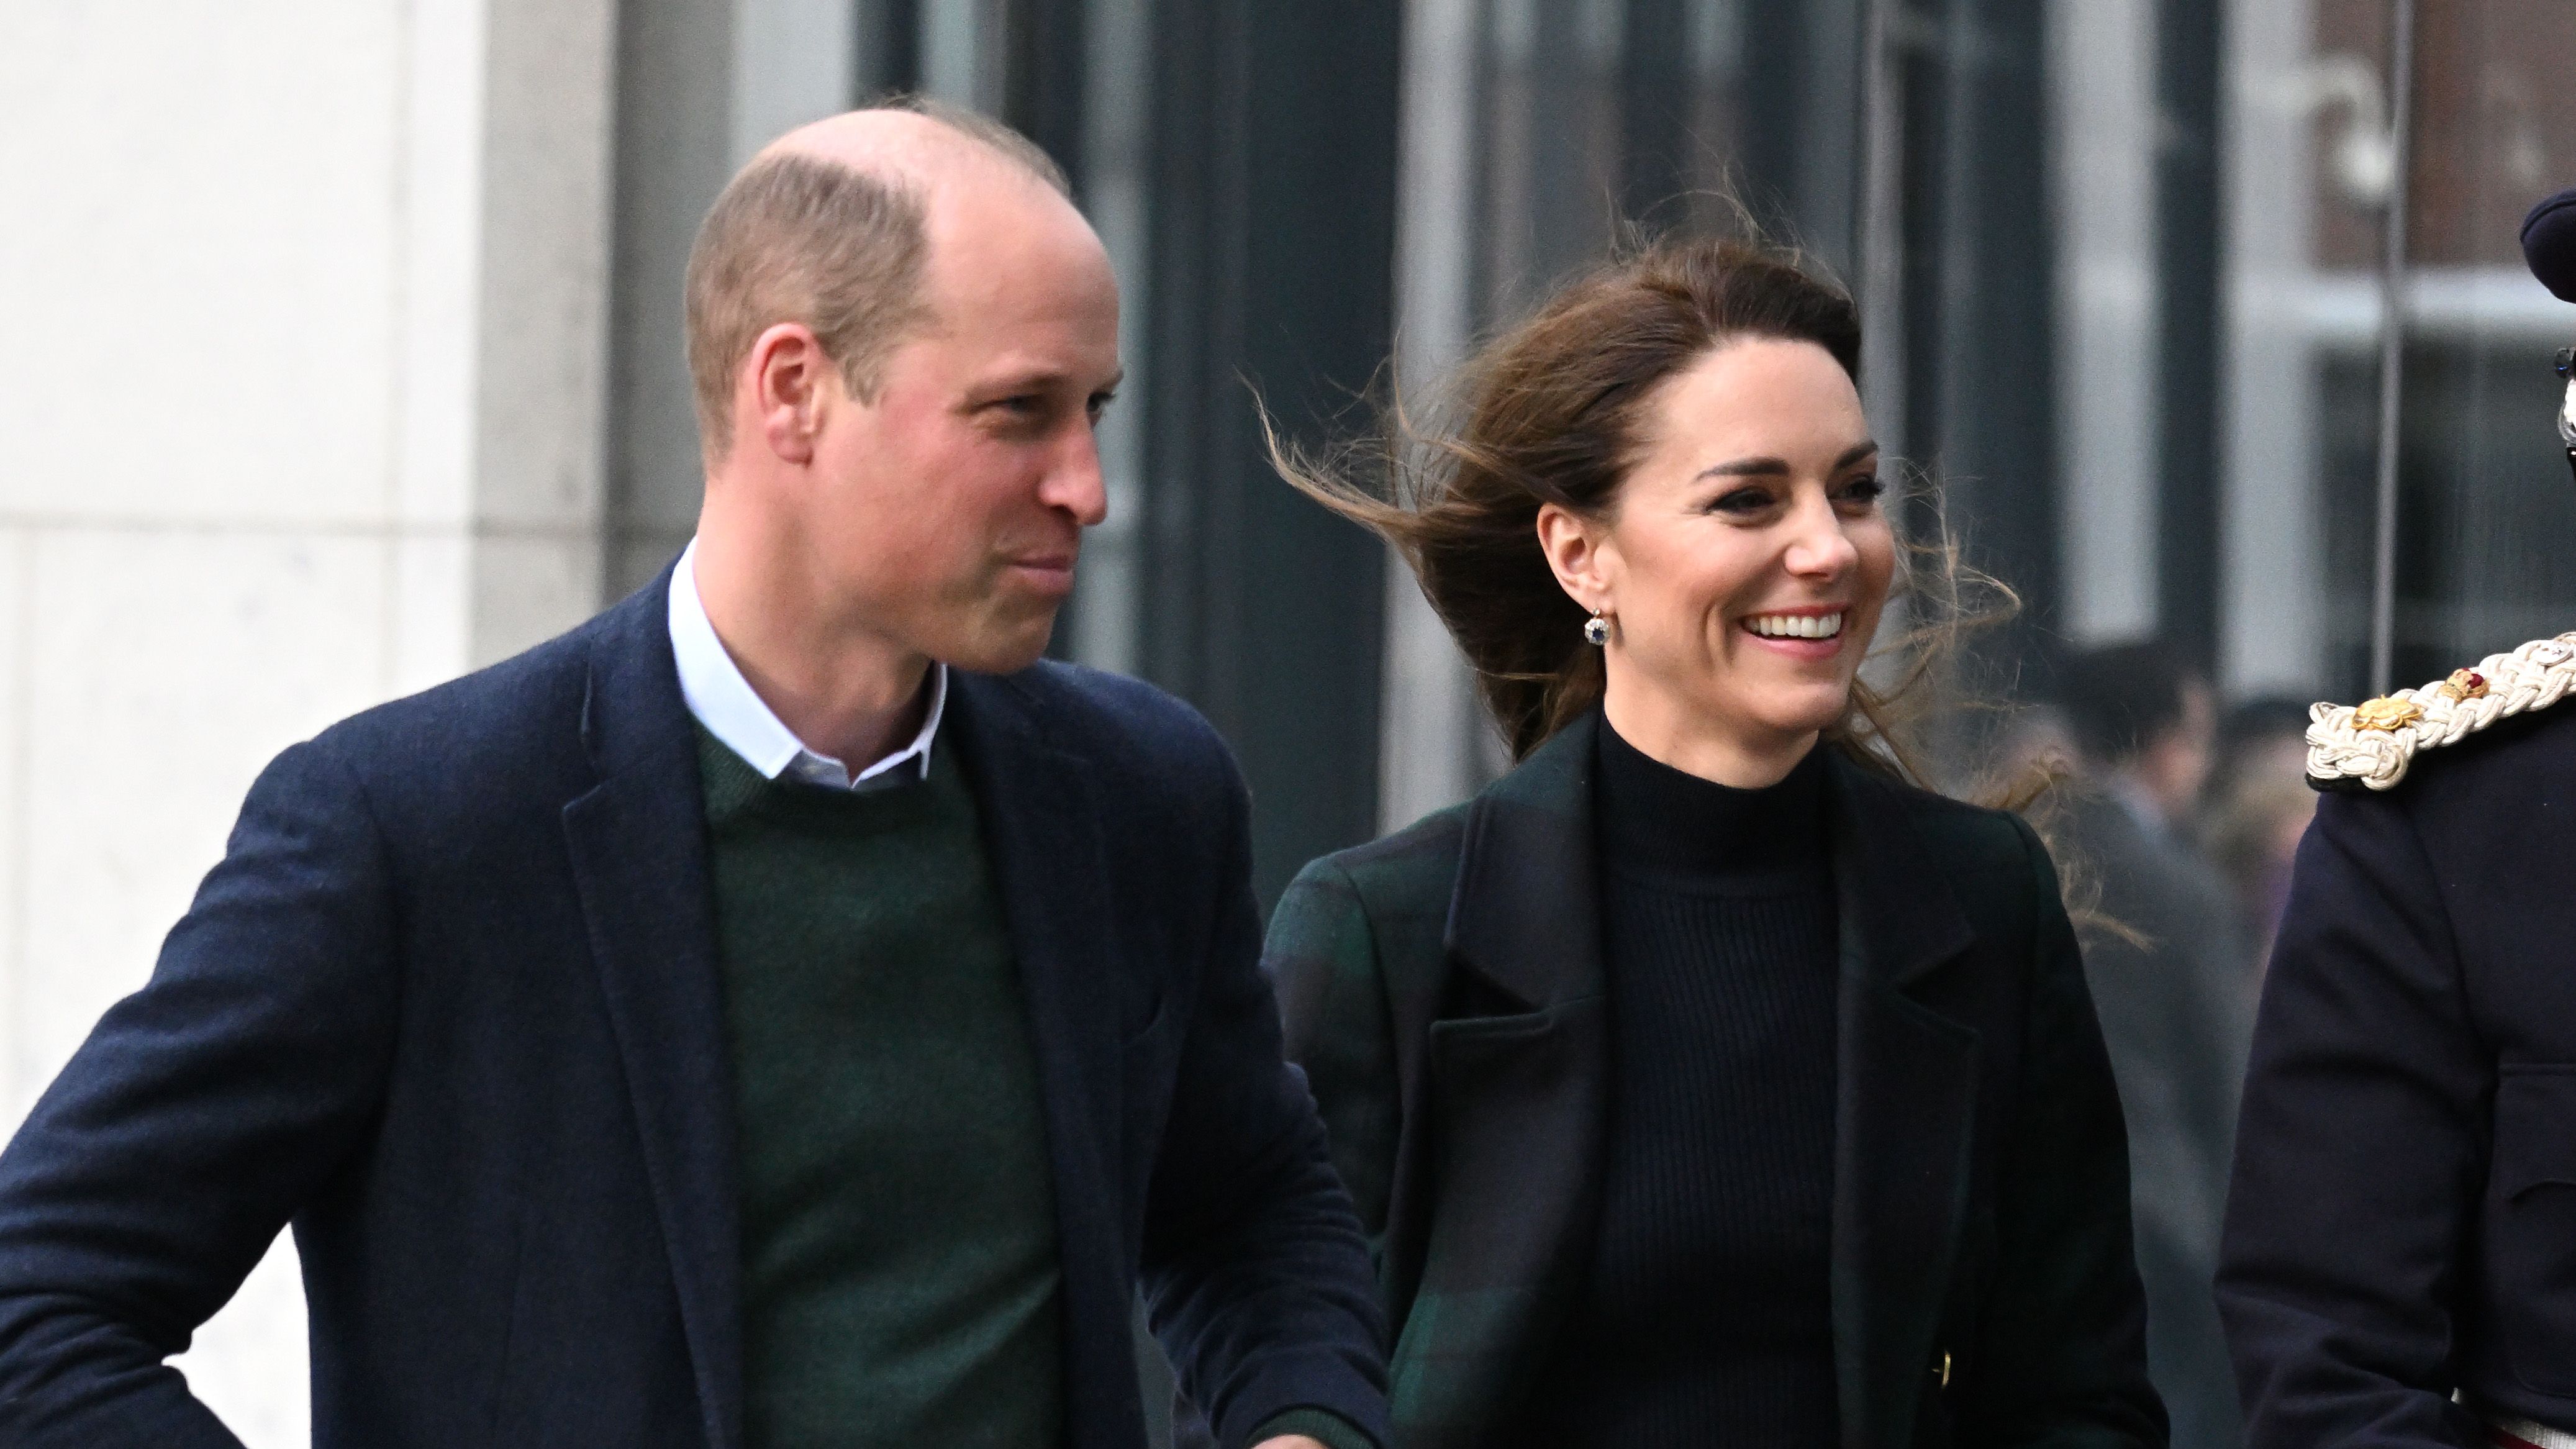 People are losing it over Kate Middleton's fashion FAIL